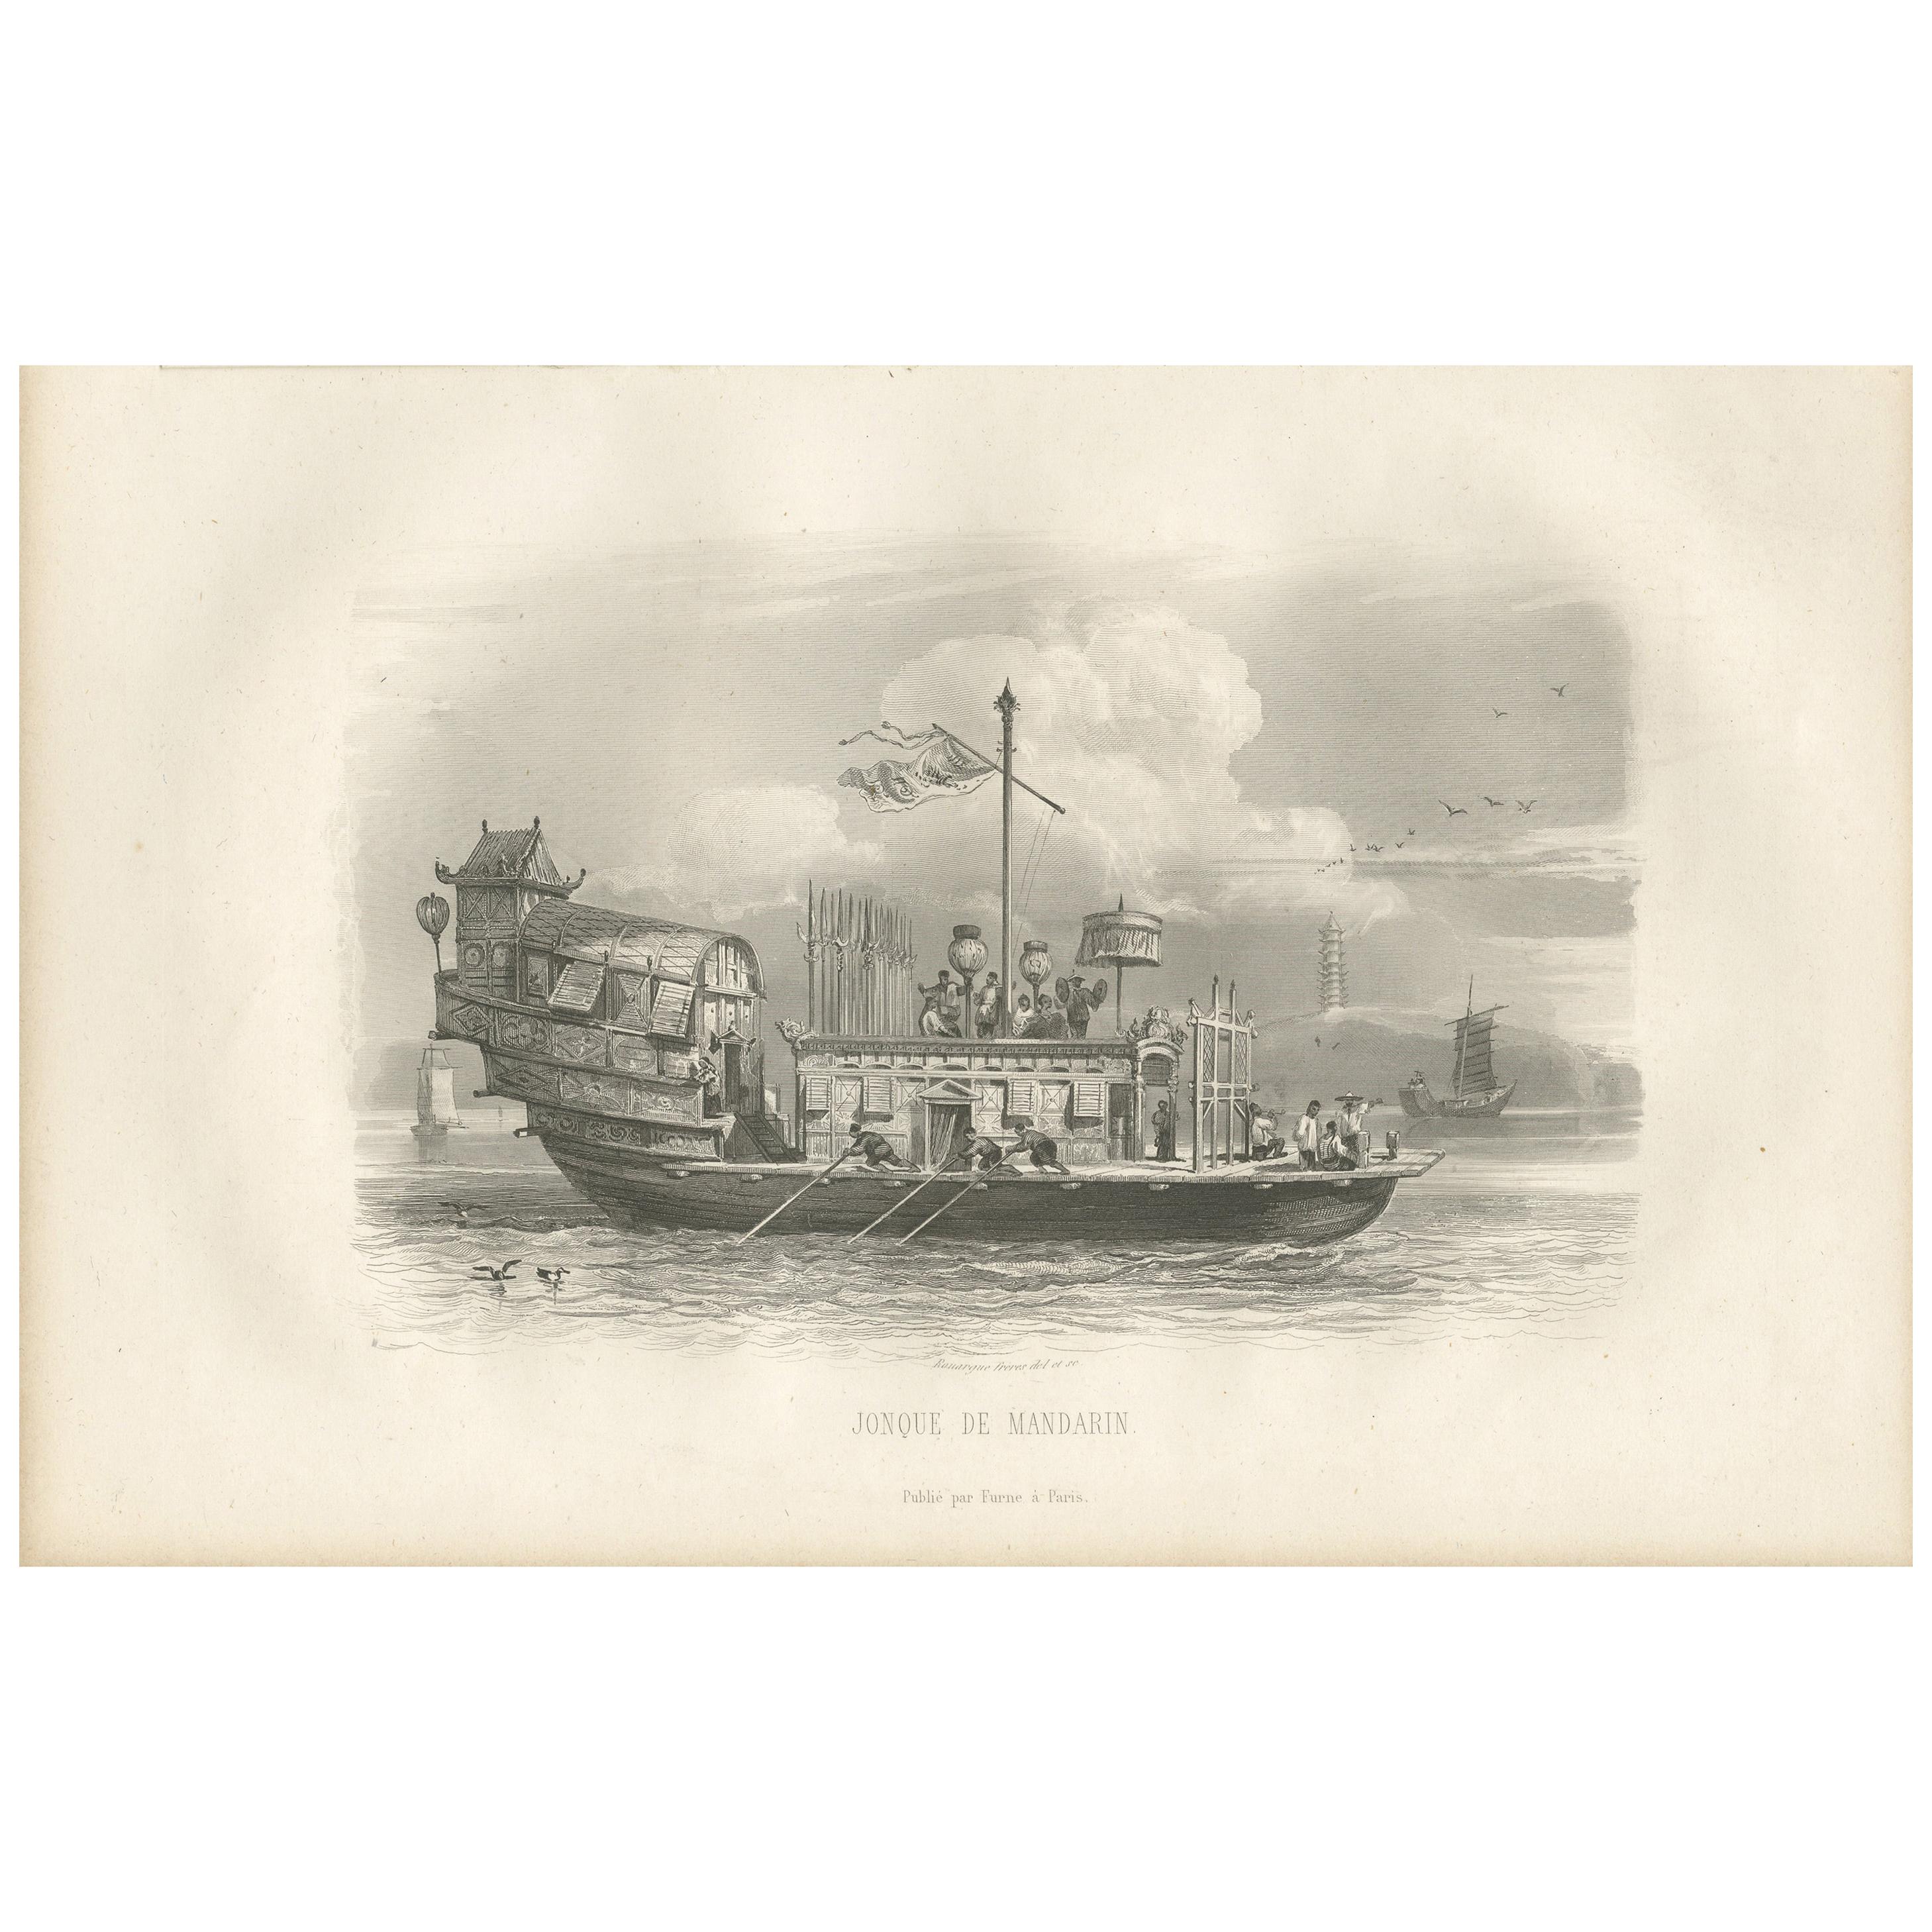 Antique Print of a Chinese Junk by D'Urville (1853)